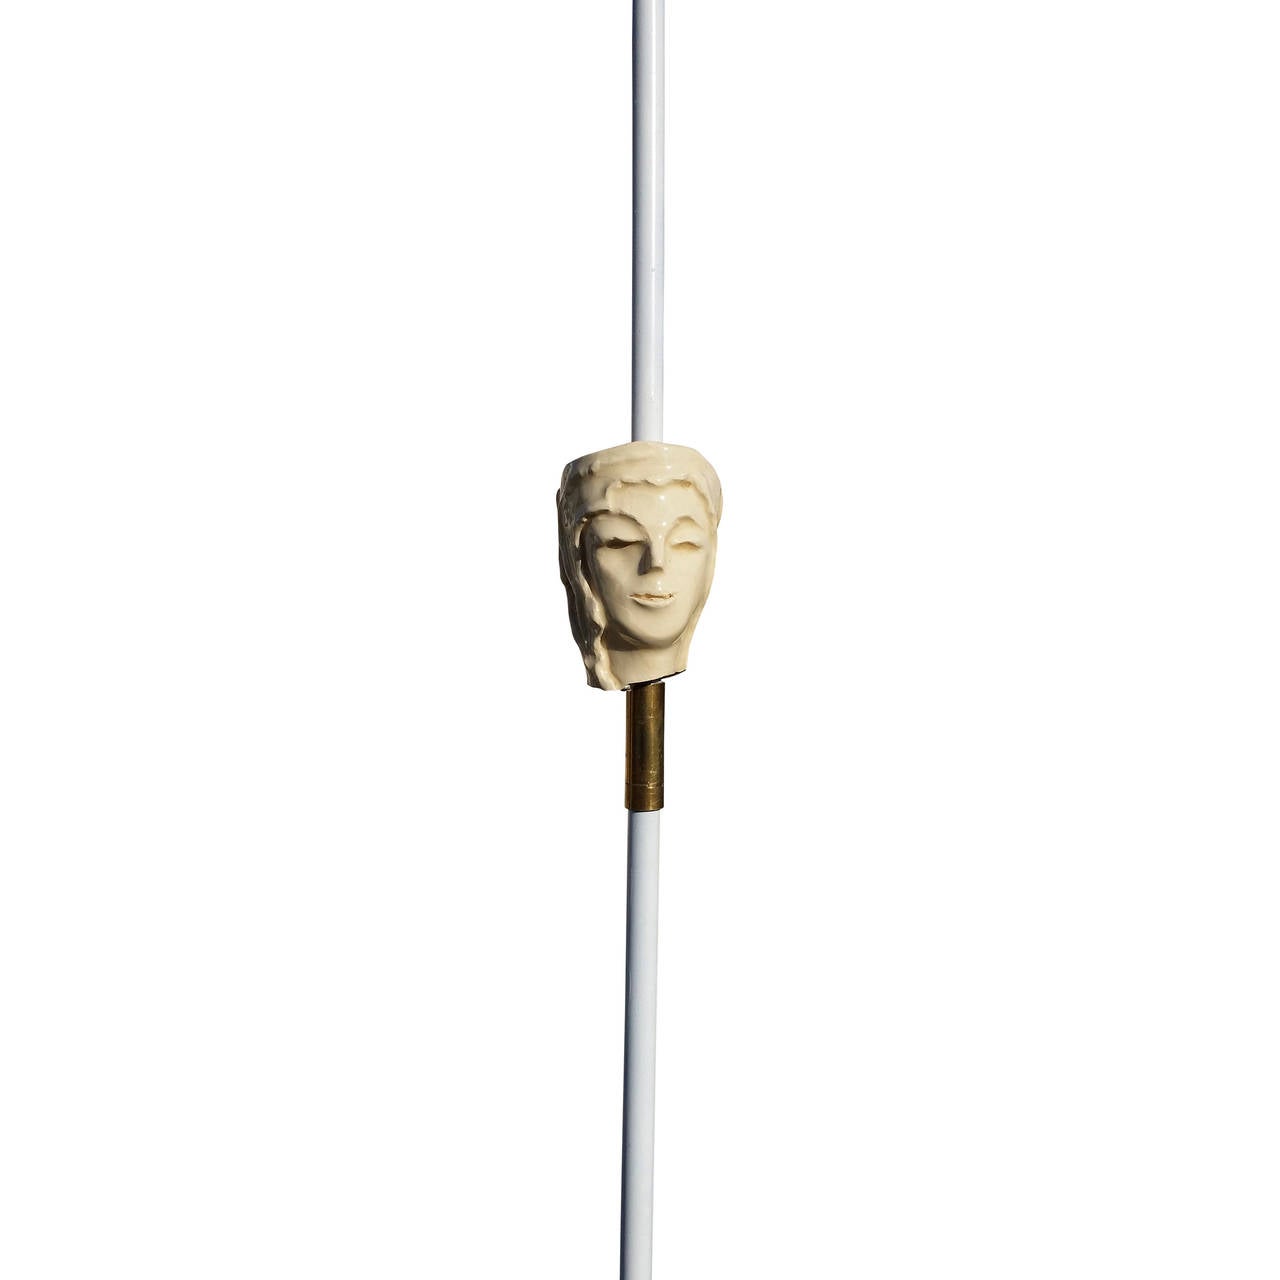 Mid-20th Century Fabulous Ceramic Head Floor Lamp Attributed to Royere, France 1950s